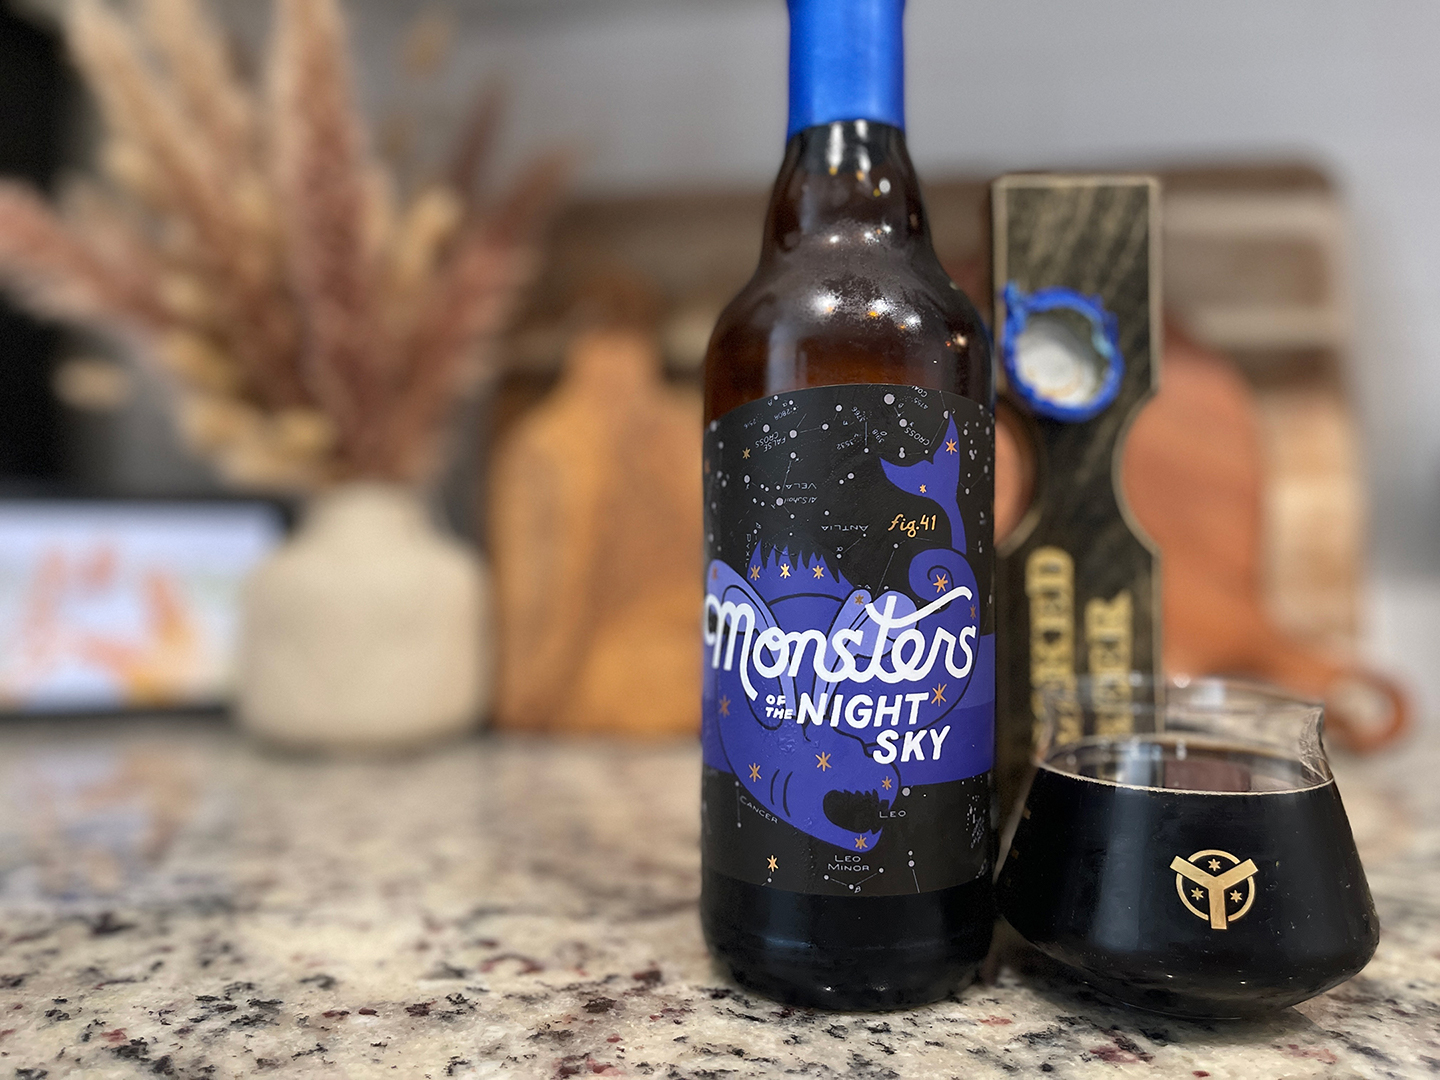 Review Imagery, Cerebral Brewing's Monsters of the Night Sky